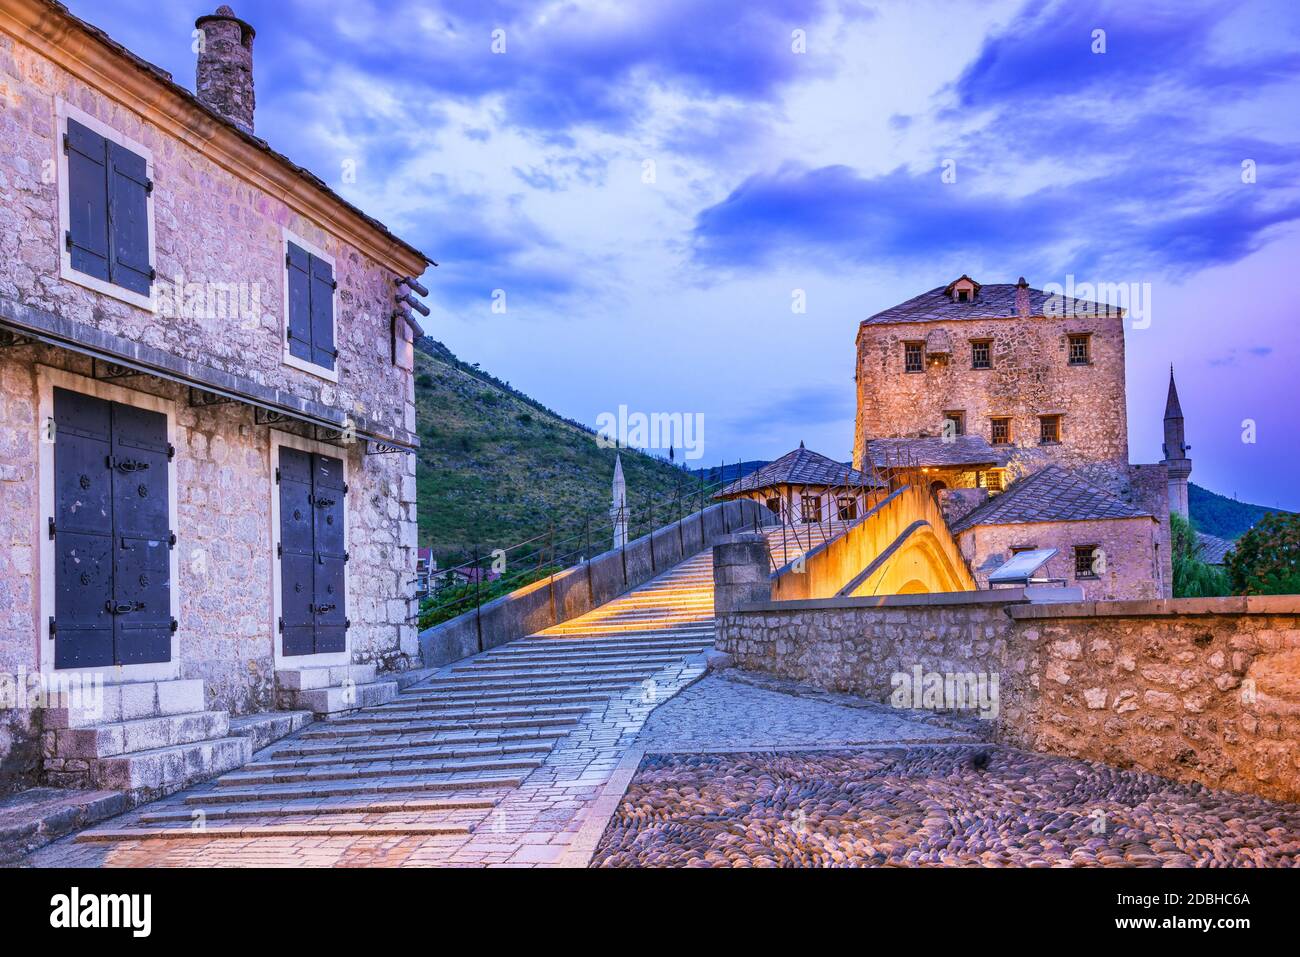 Mostar, Old Town, Bosnia and Herzegovina, Europe. Skyline of Mostar with the Stari Most Bridge, houses and minarets, at sunrise. Stock Photo